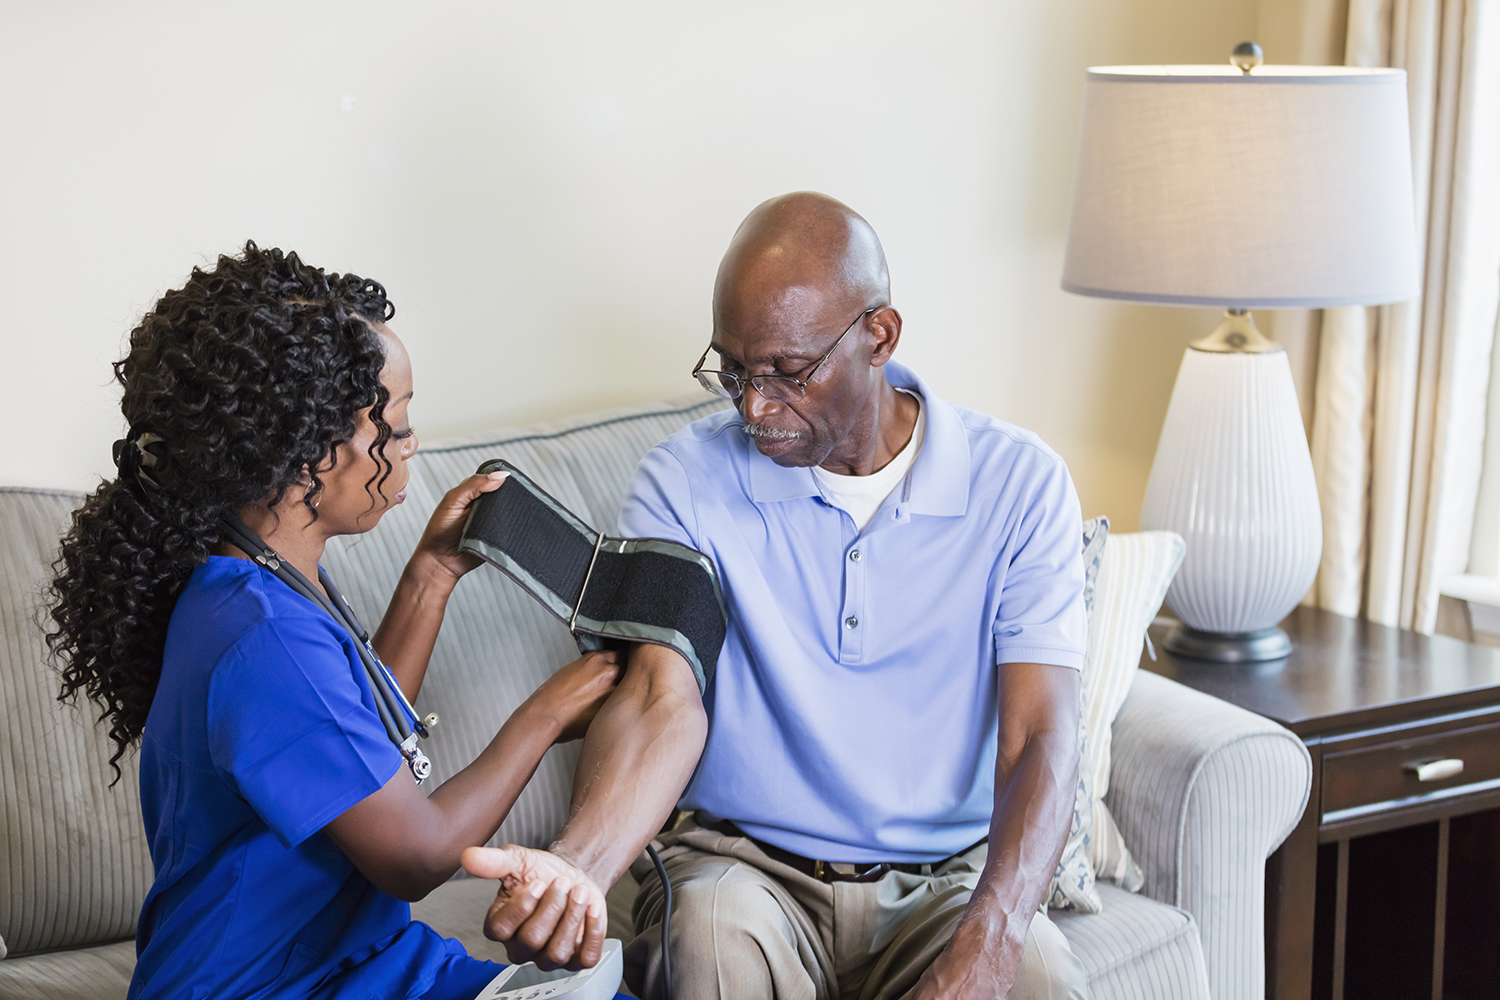 Nurse visiting patient for an in-home clinical trial visit